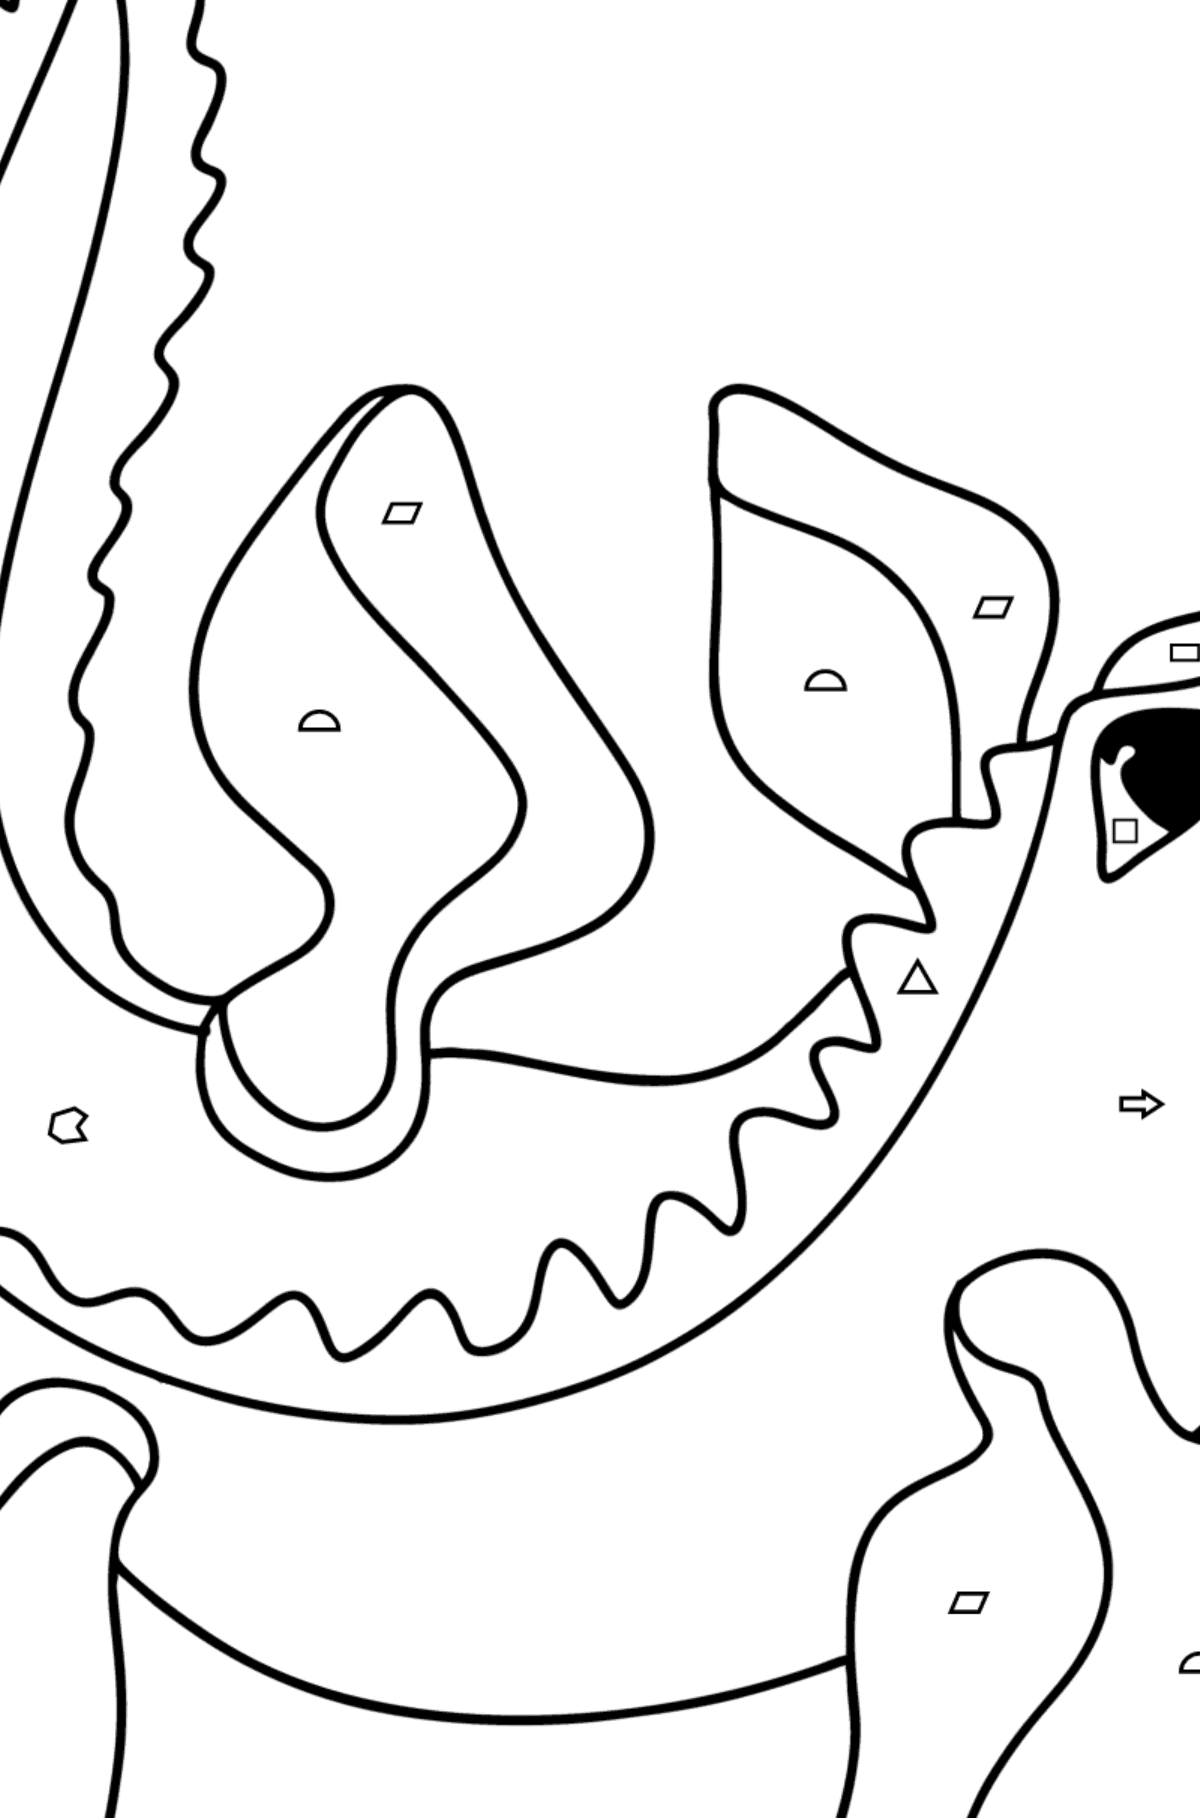 Mosasaurus coloring page - Coloring by Geometric Shapes for Kids